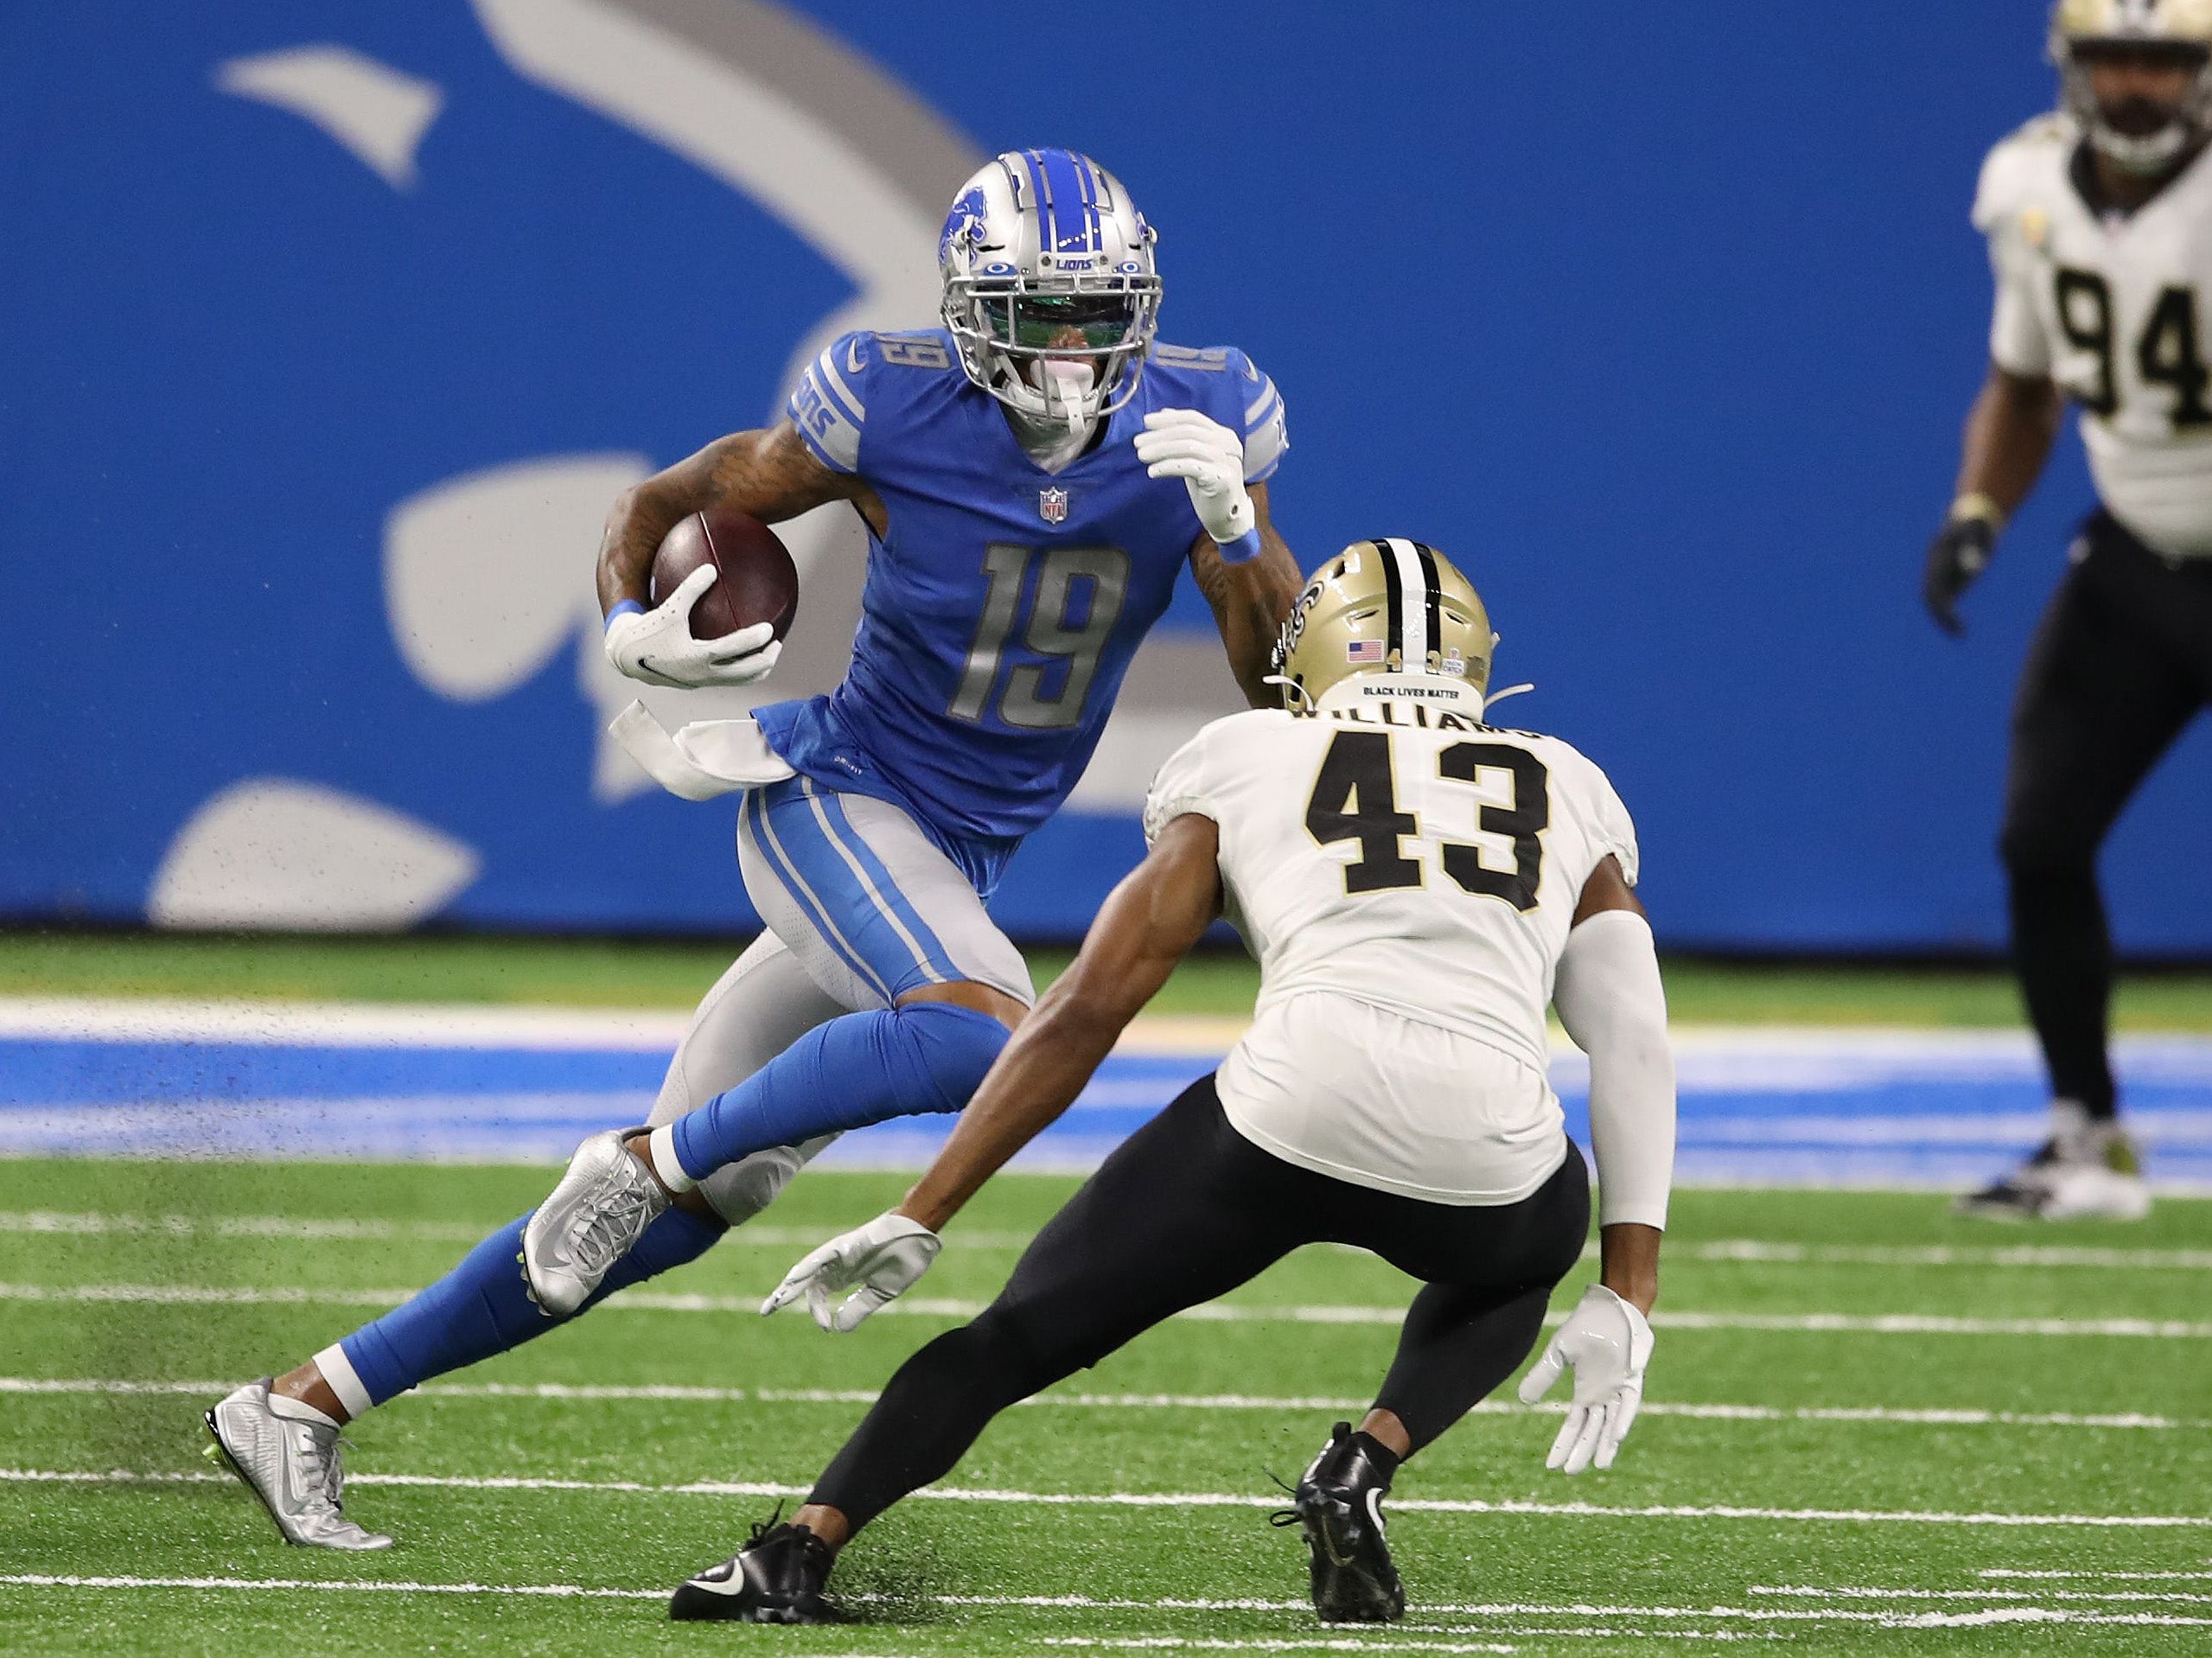 Kenny Golladay is the best WR on the market this off-season